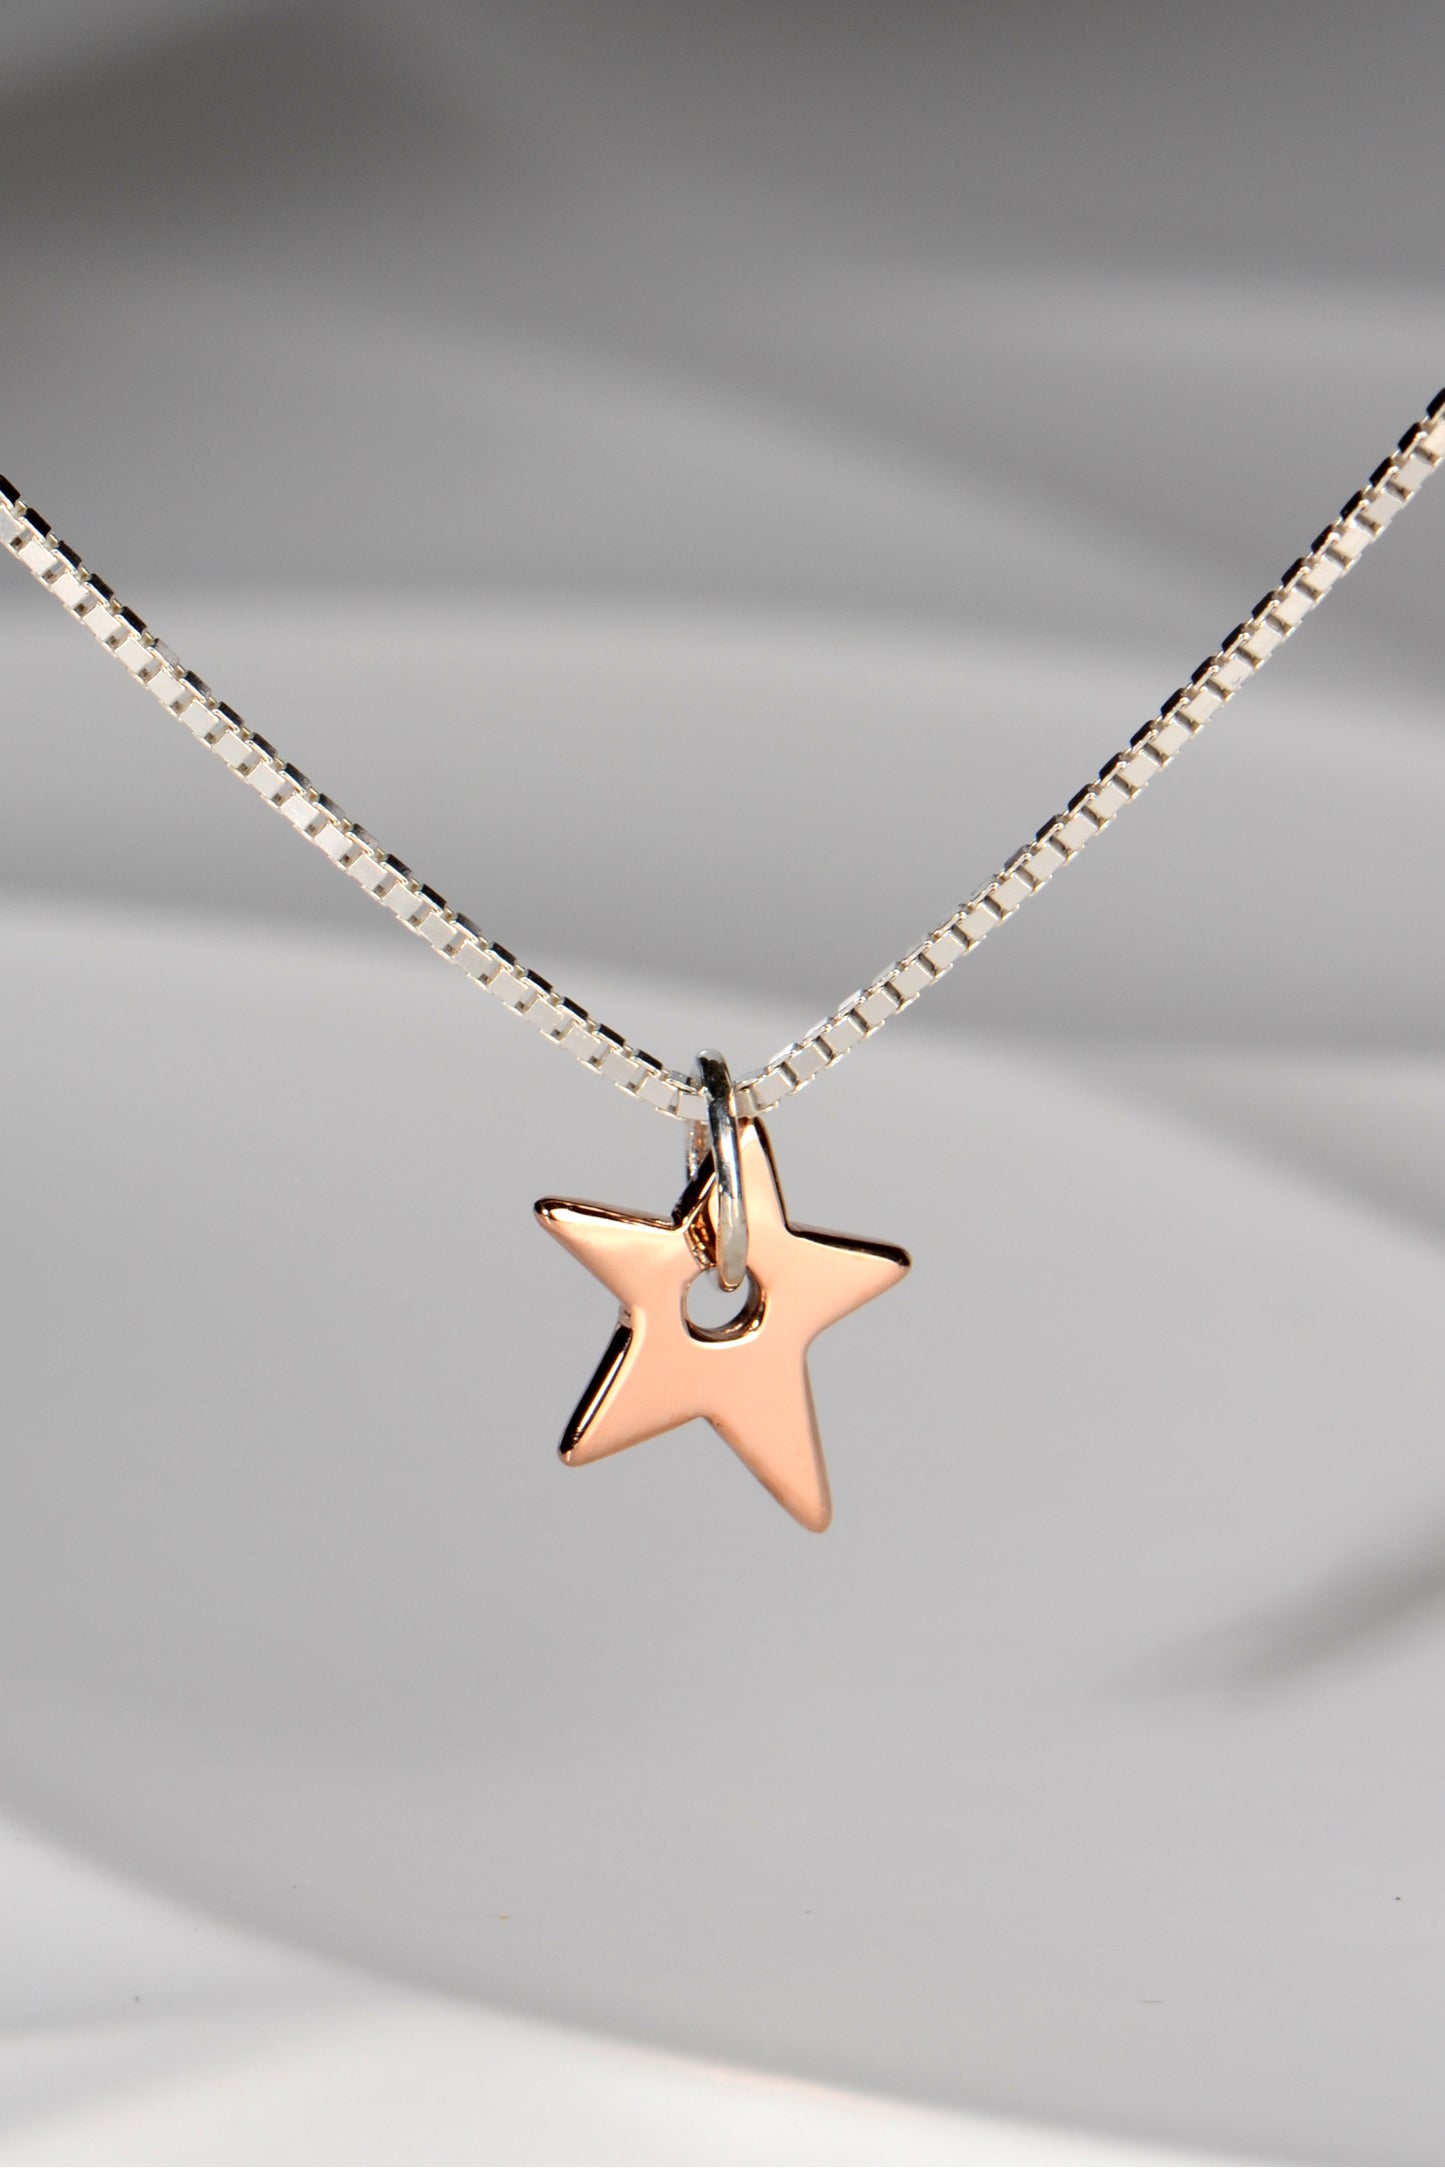 Falling Star rose gold and silver necklace